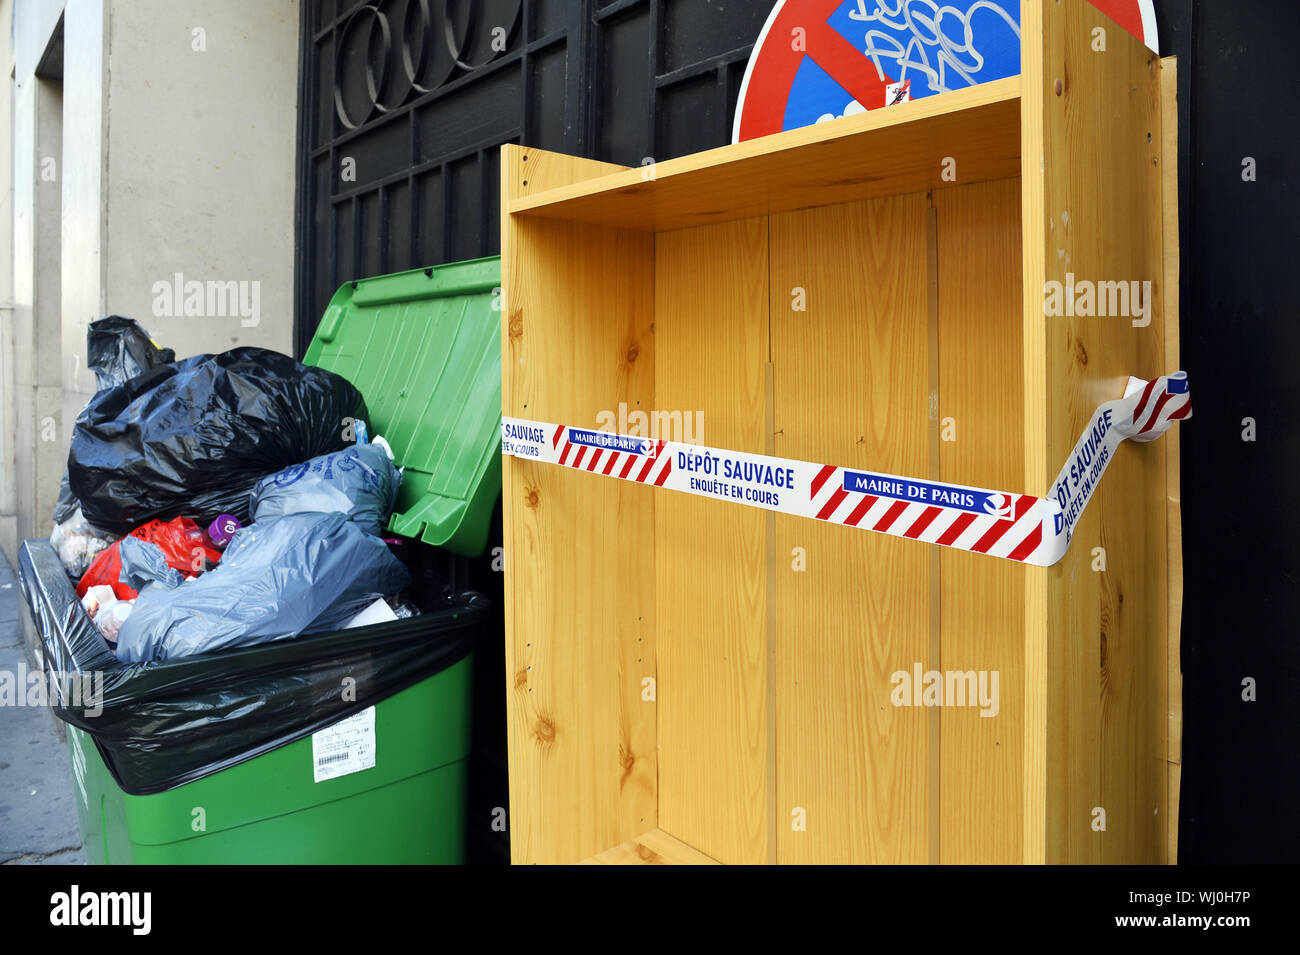 Waste disposal on the pavement - Paris - France Stock Photo